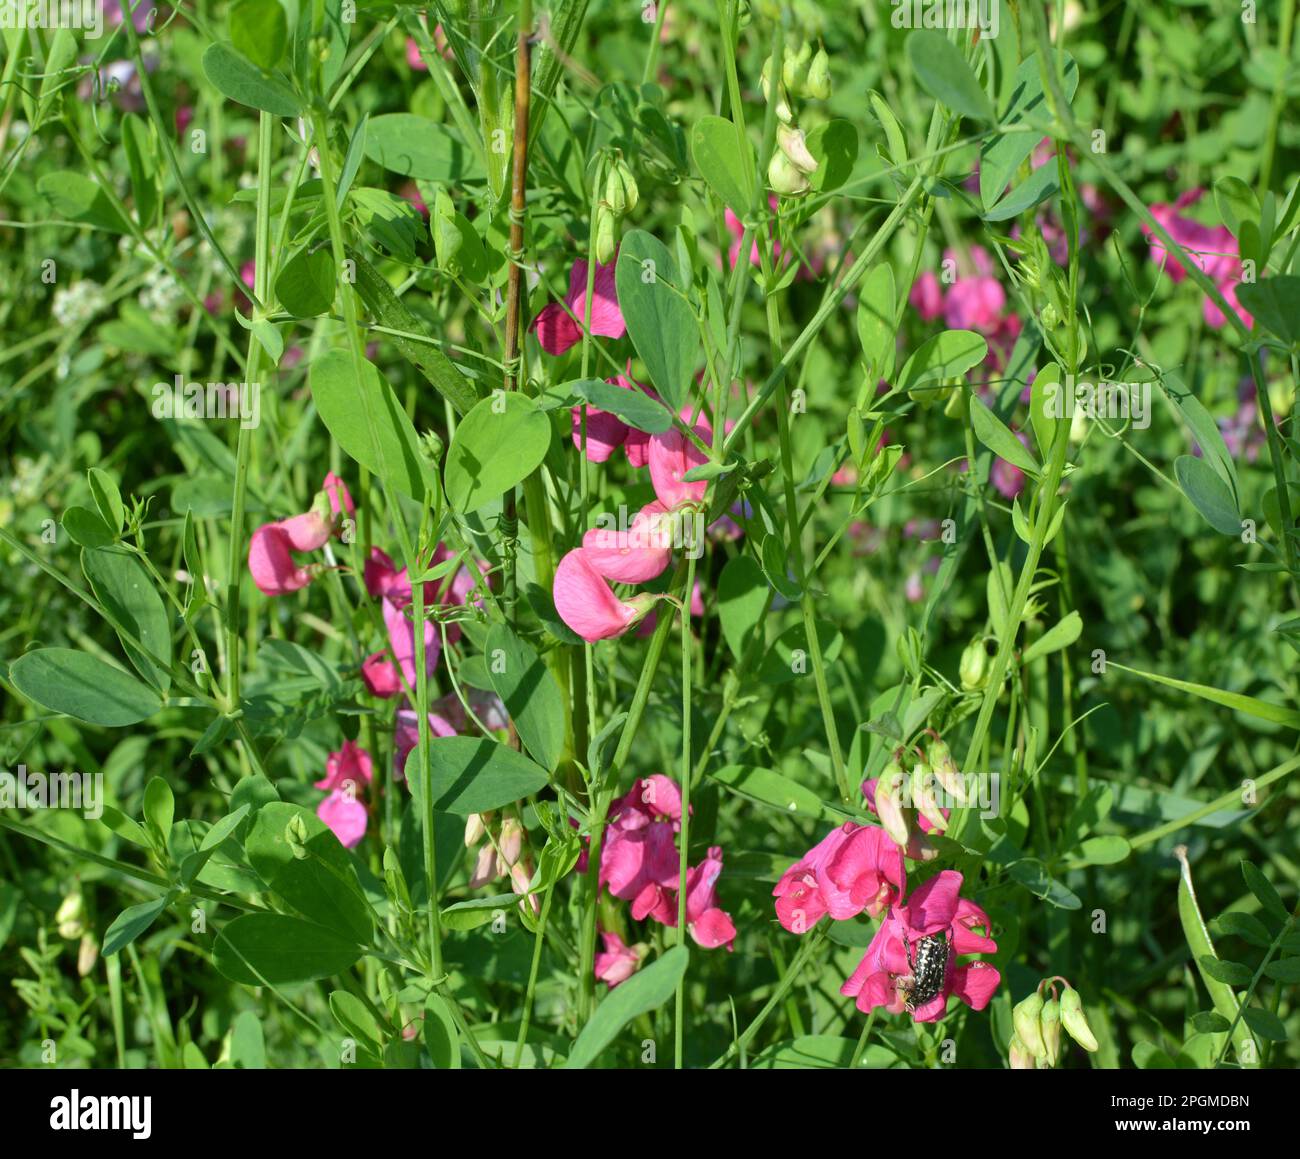 In summer, Lathyrus tuberosus grows among the grasses in the field Stock Photo